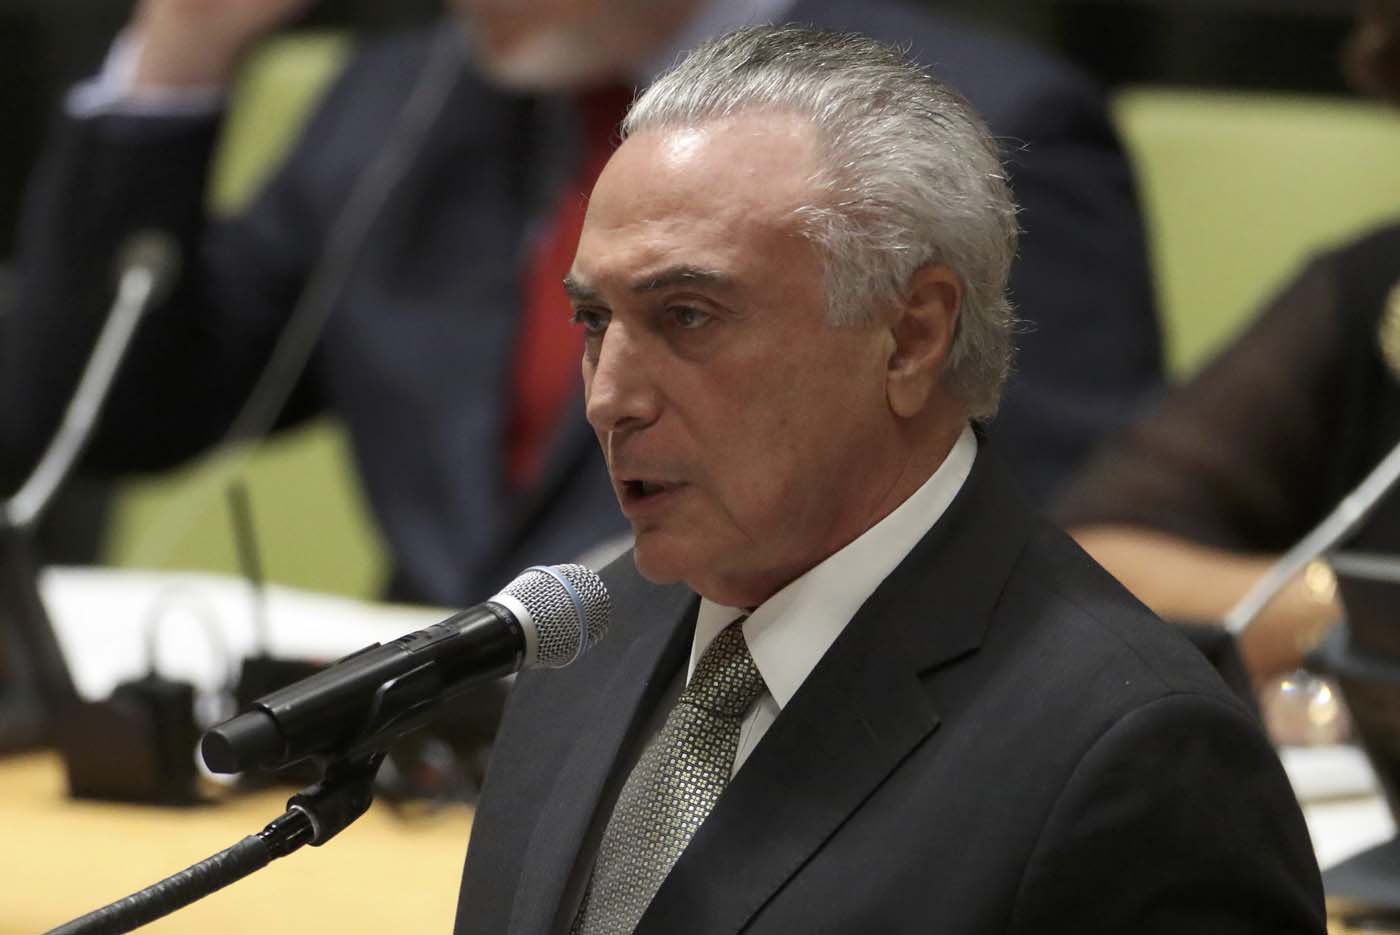 President Michel Temer of Brazil speaks during a high-level meeting on addressing large movements of refugees and migrants at the United Nations General Assembly in Manhattan, New York, U.S. September 19, 2016. REUTERS/Carlo Allegri